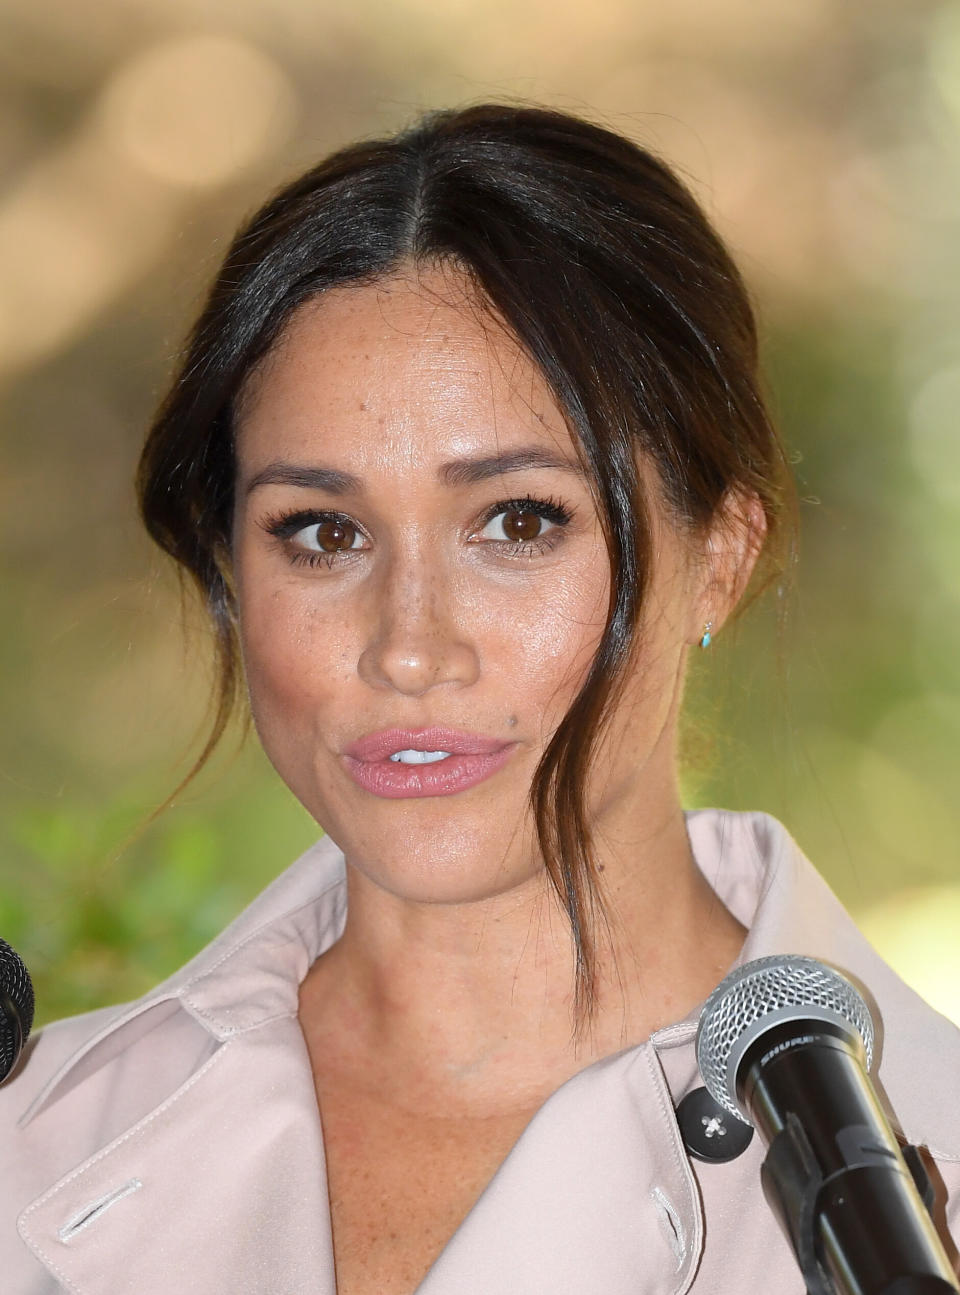 Meghan Markle, Duchess of Sussex during the royal tour to South Africa on Oct. 2.